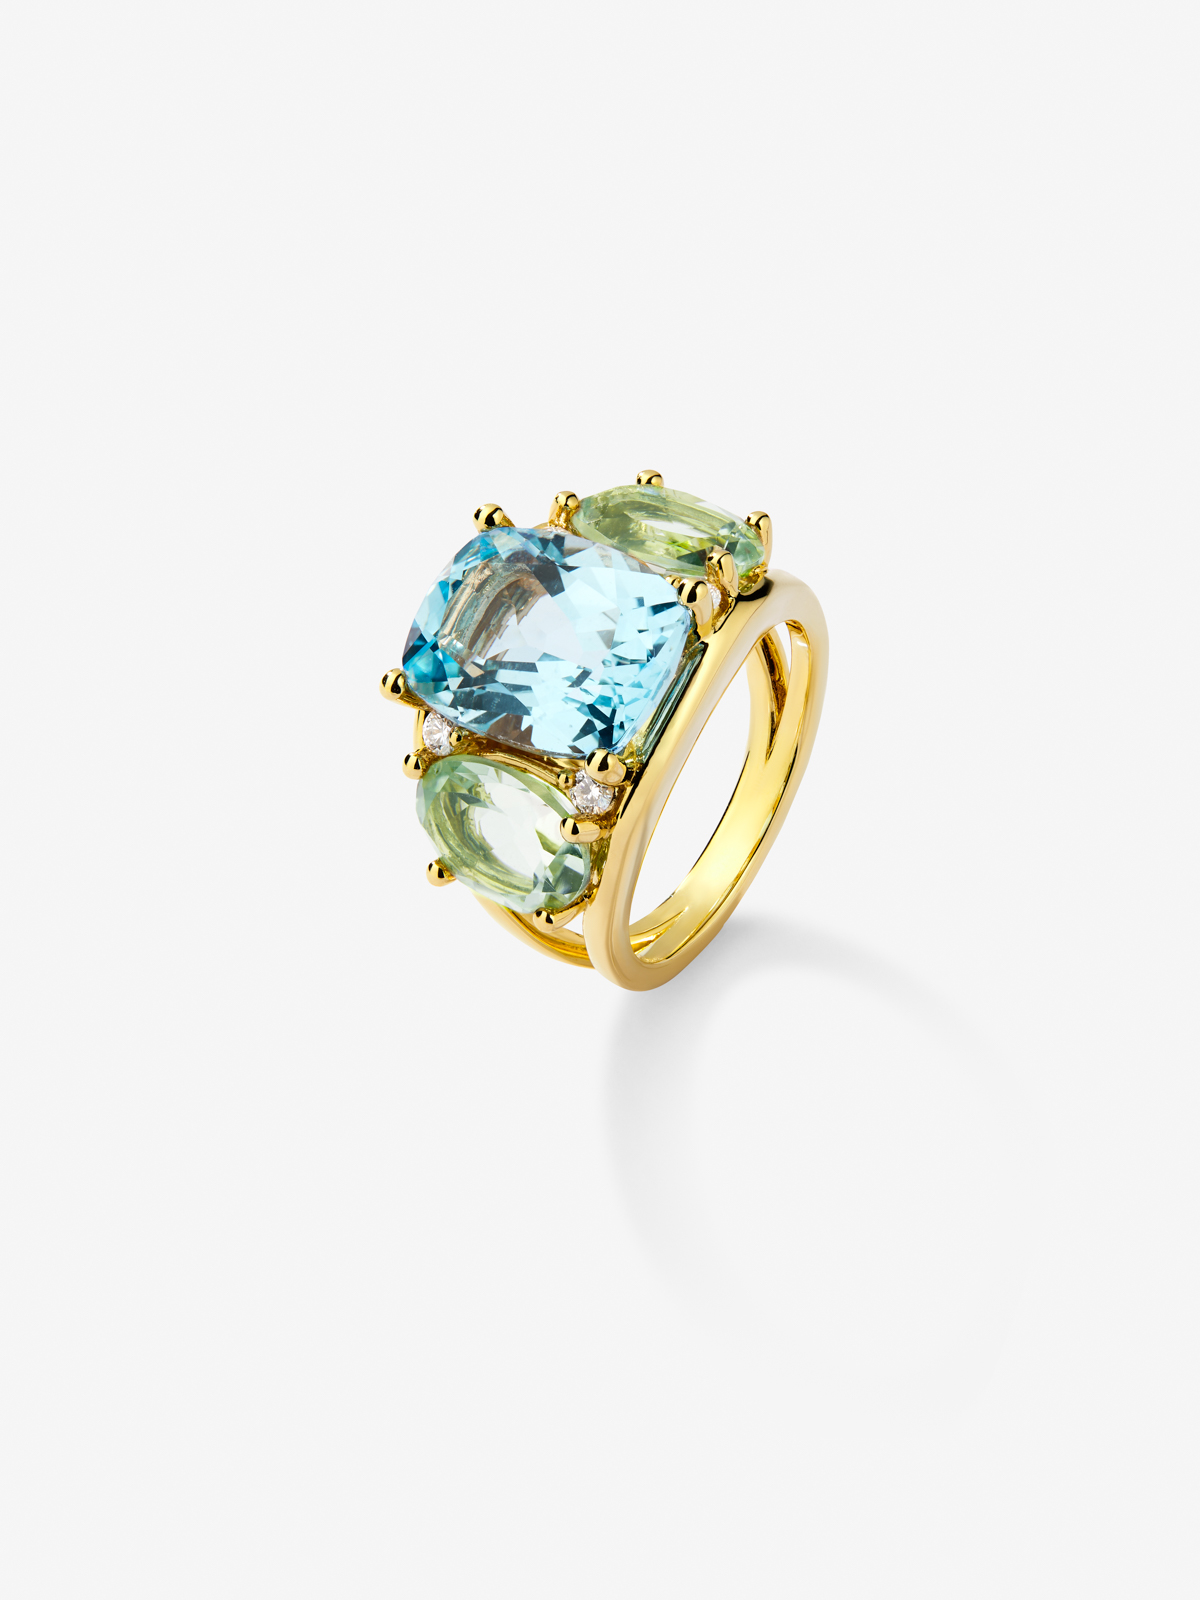 18K yellow gold ring with blue Sky Topacio in 5.5 cts Cushion size, green -sized icatists of 4.65 cts and white diamonds in a brilliant size of 0.15 cts